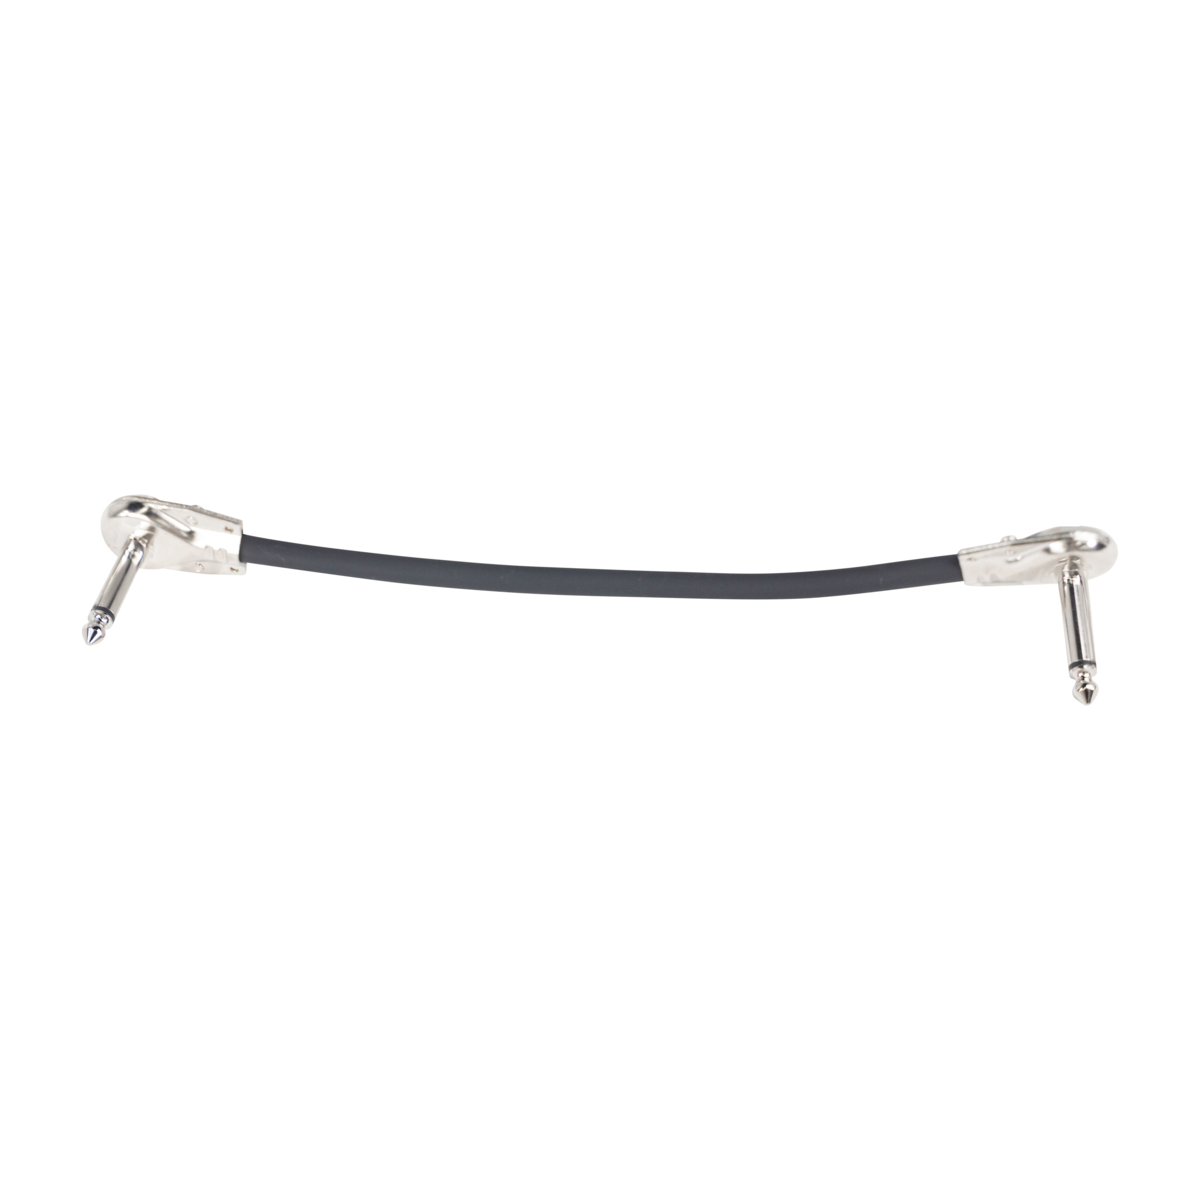 6-inch Instrument/Patch Cable